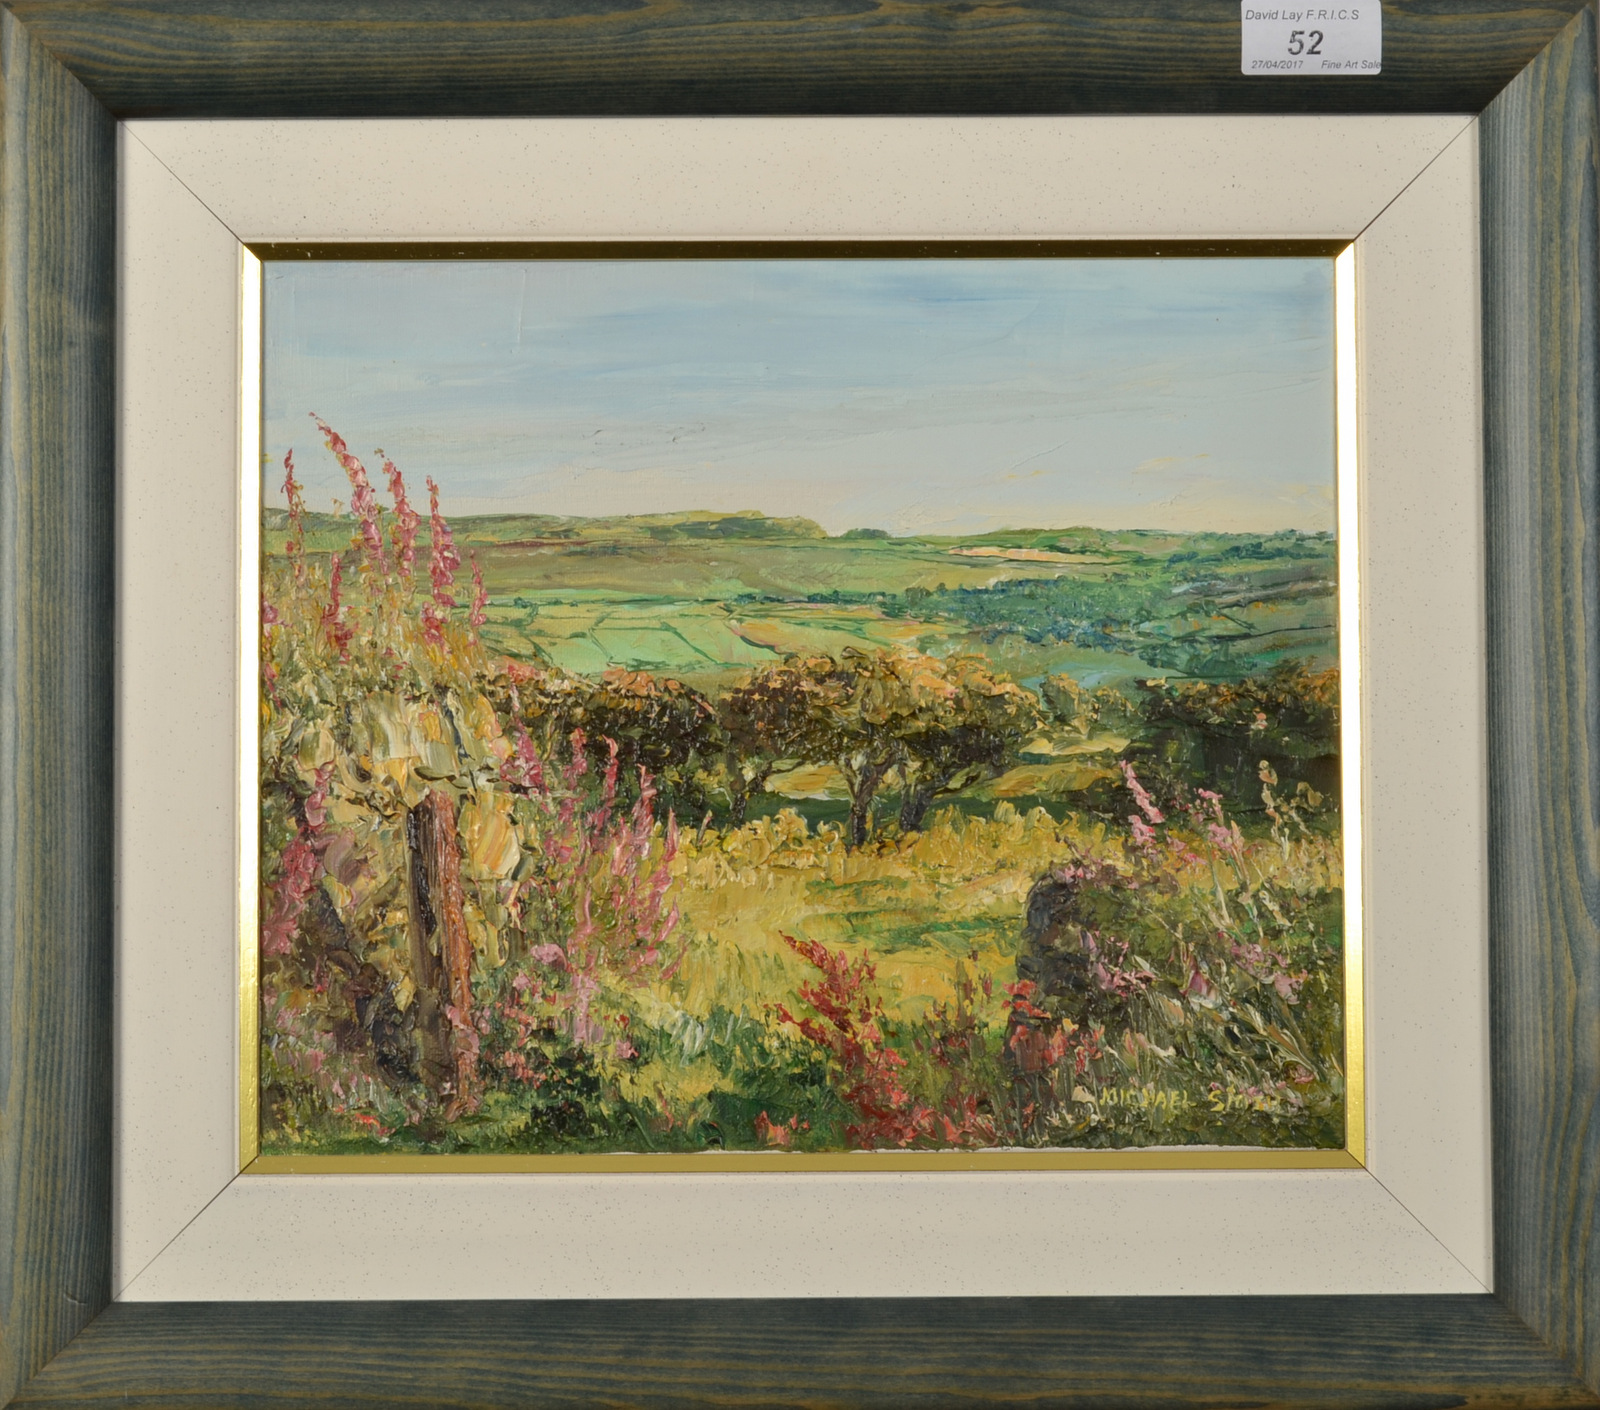 MICHAEL SMITH Cornish Countryside Oil on canvas Signed Gallery certificate 25 x 30cm plus 2 other - Image 2 of 4